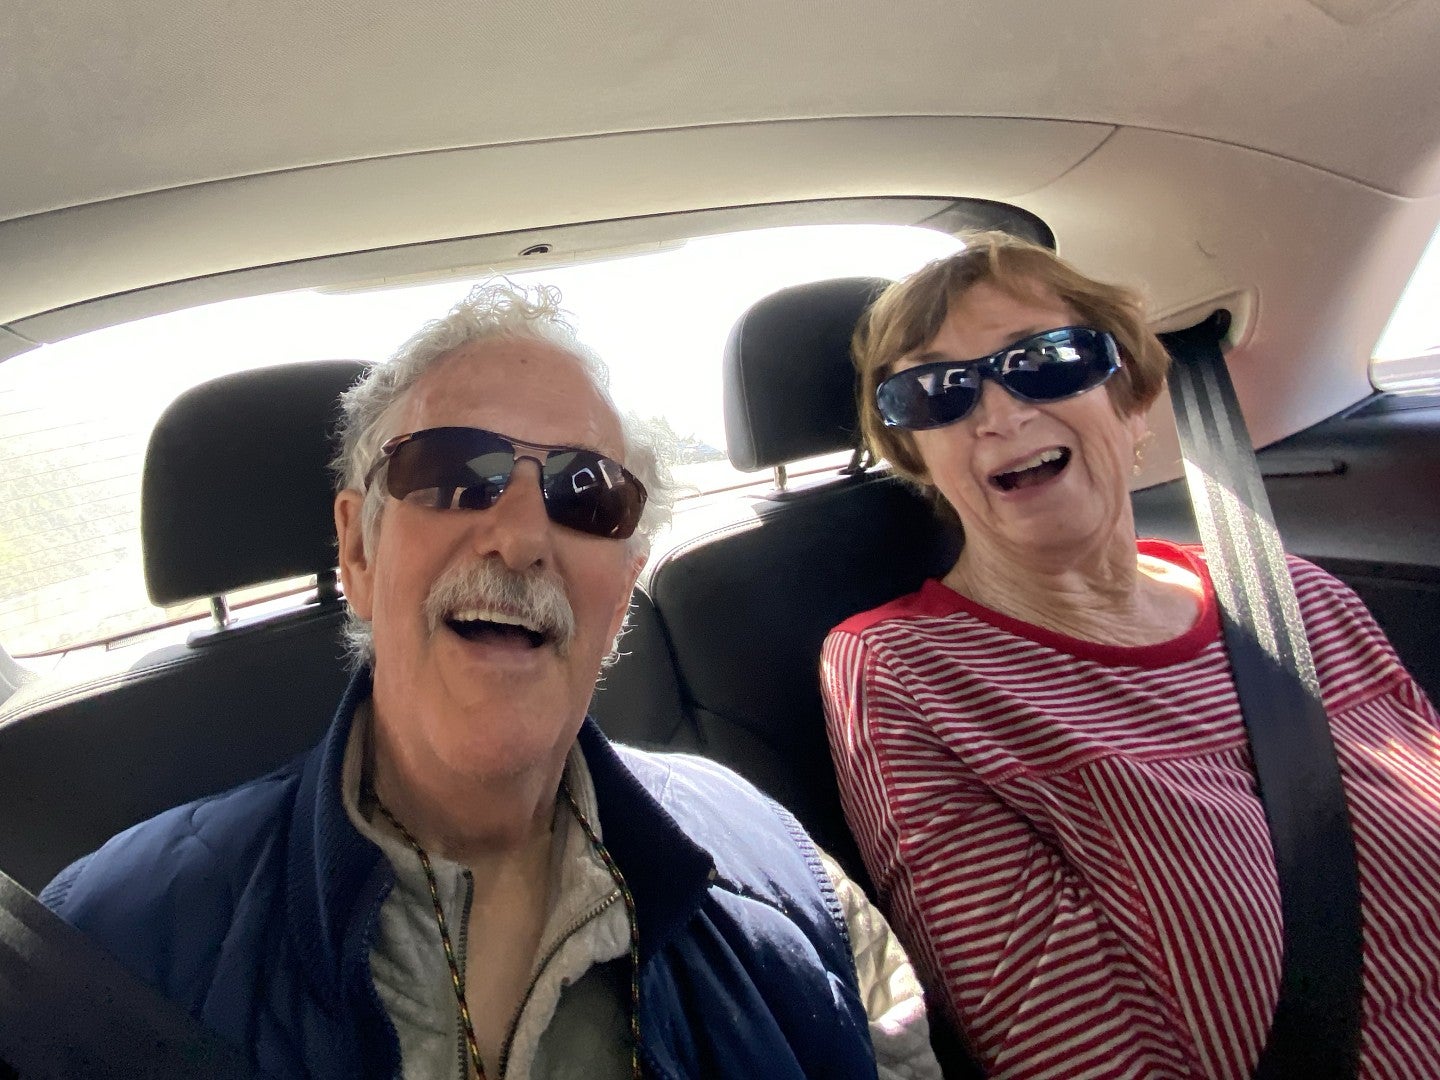 grandparents taking a selfie with sunglasses on in the backseat of a car